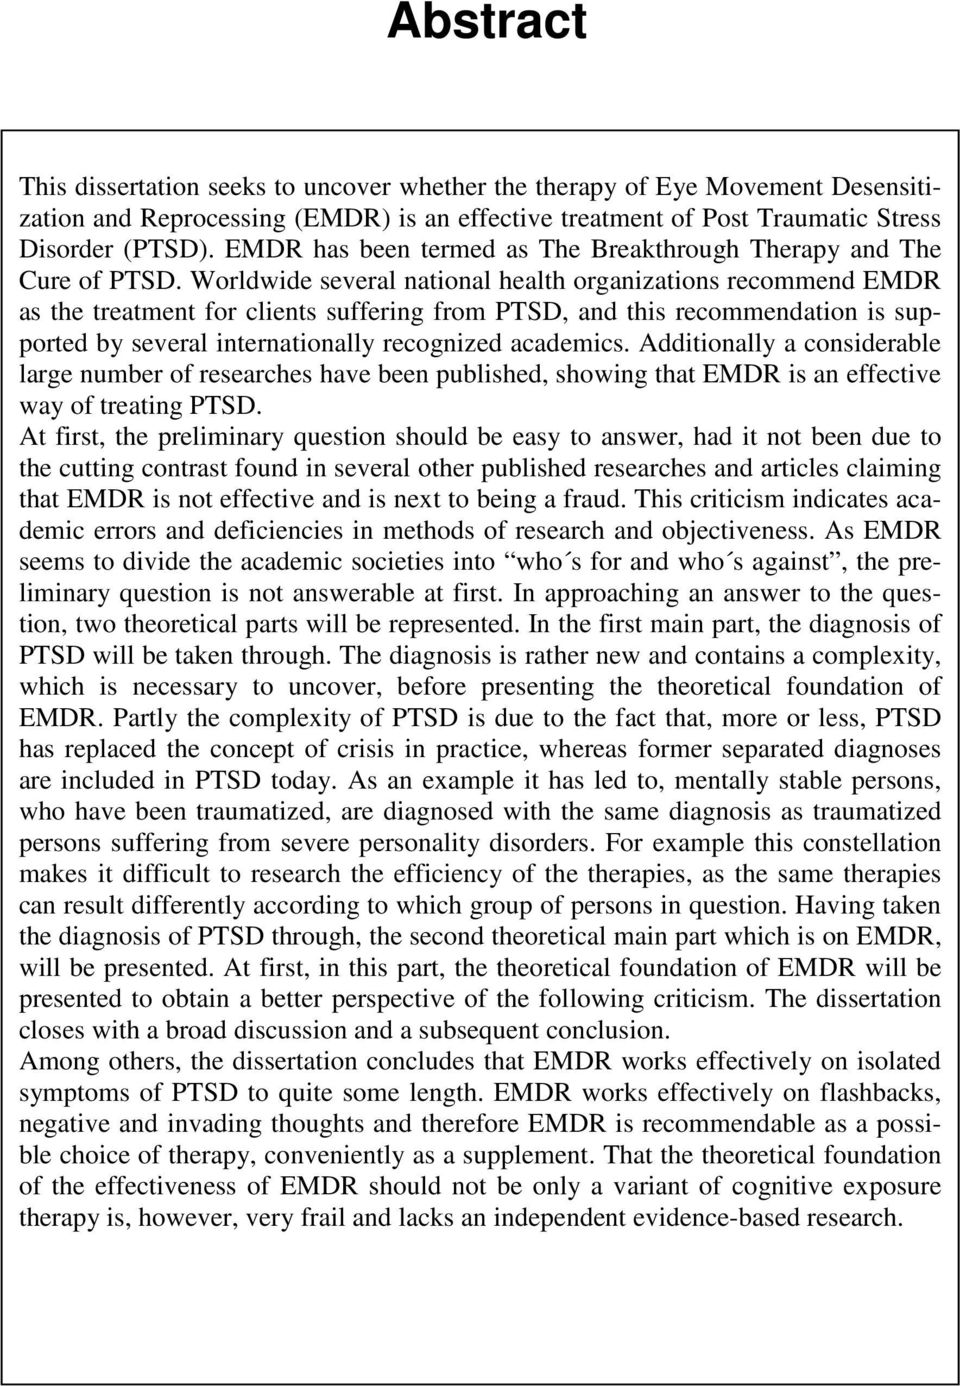 Worldwide several national health organizations recommend EMDR as the treatment for clients suffering from PTSD, and this recommendation is supported by several internationally recognized academics.